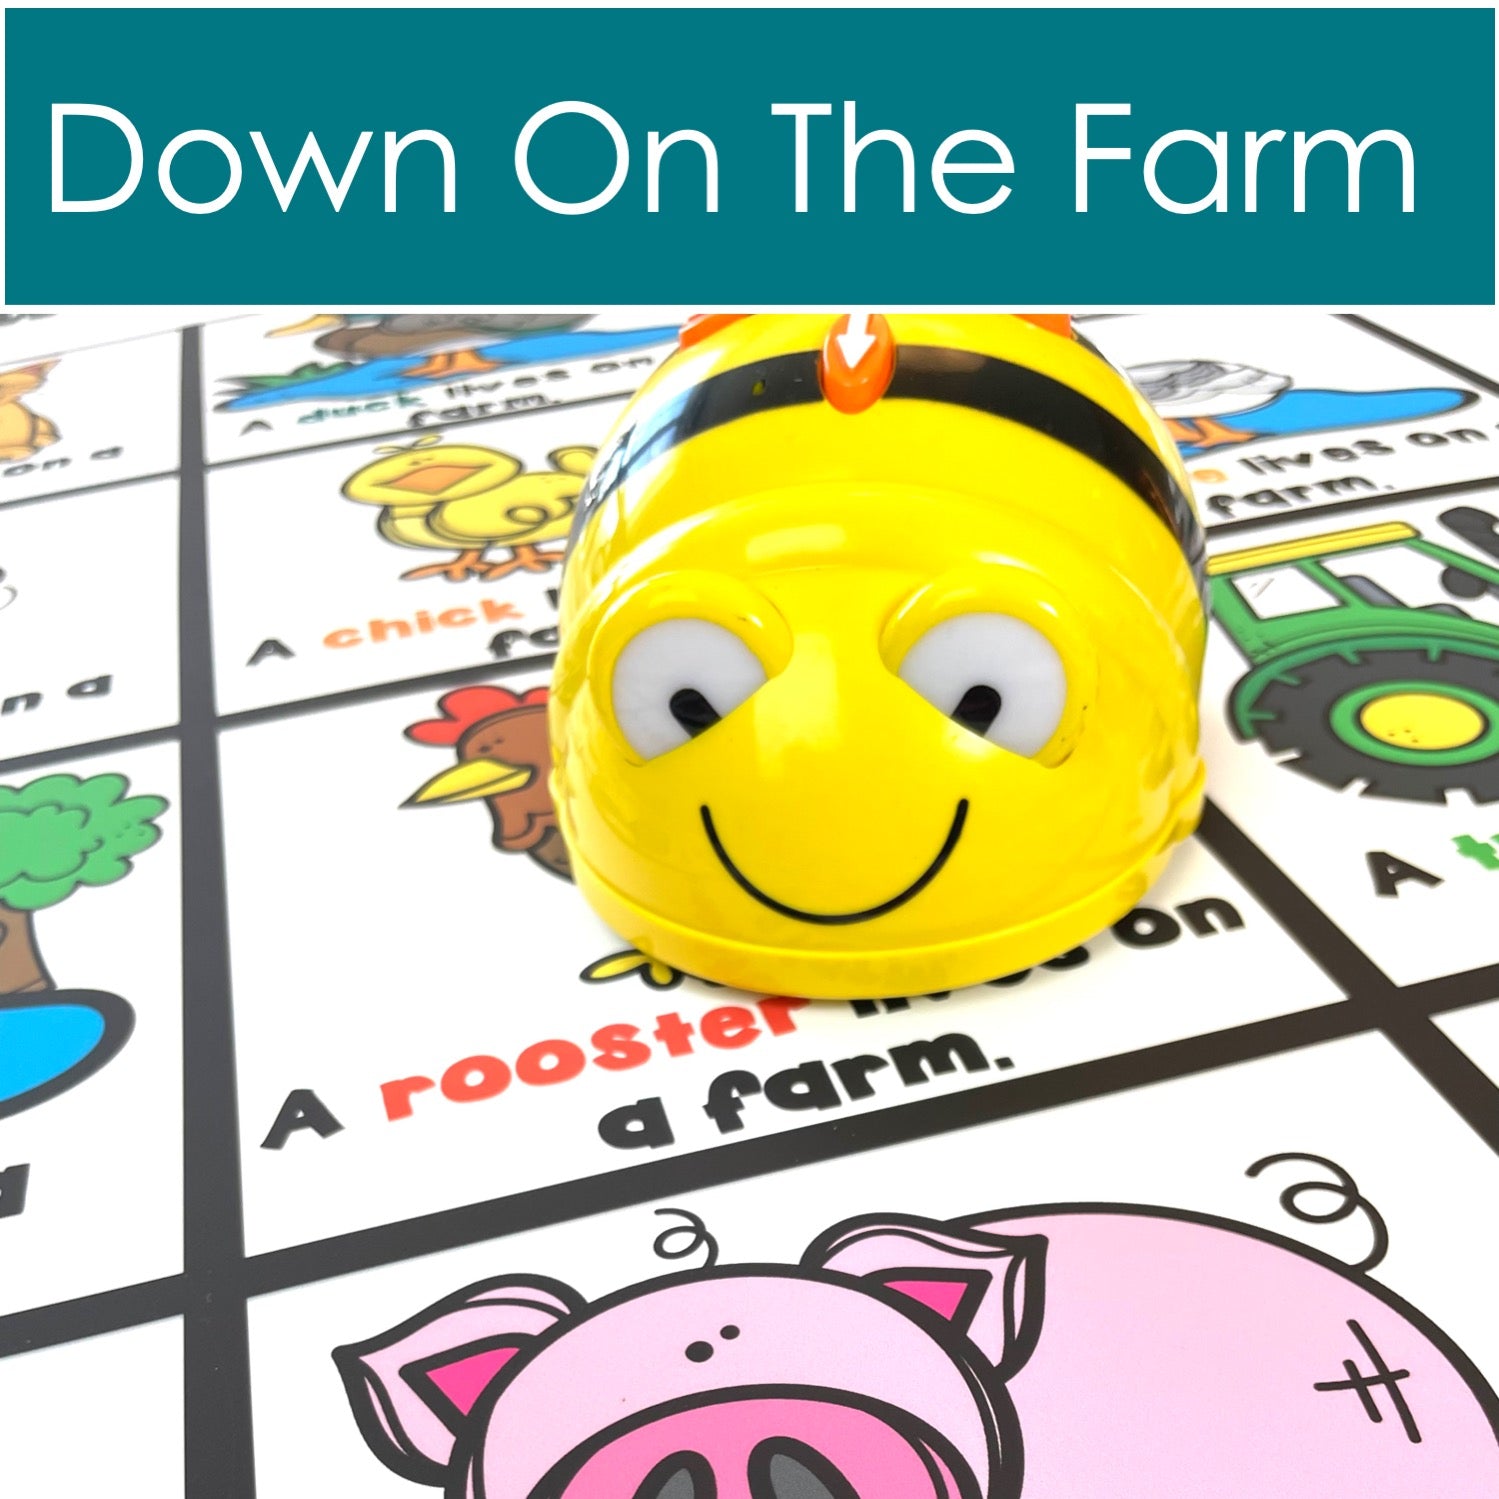 Beebot mat down on the farm